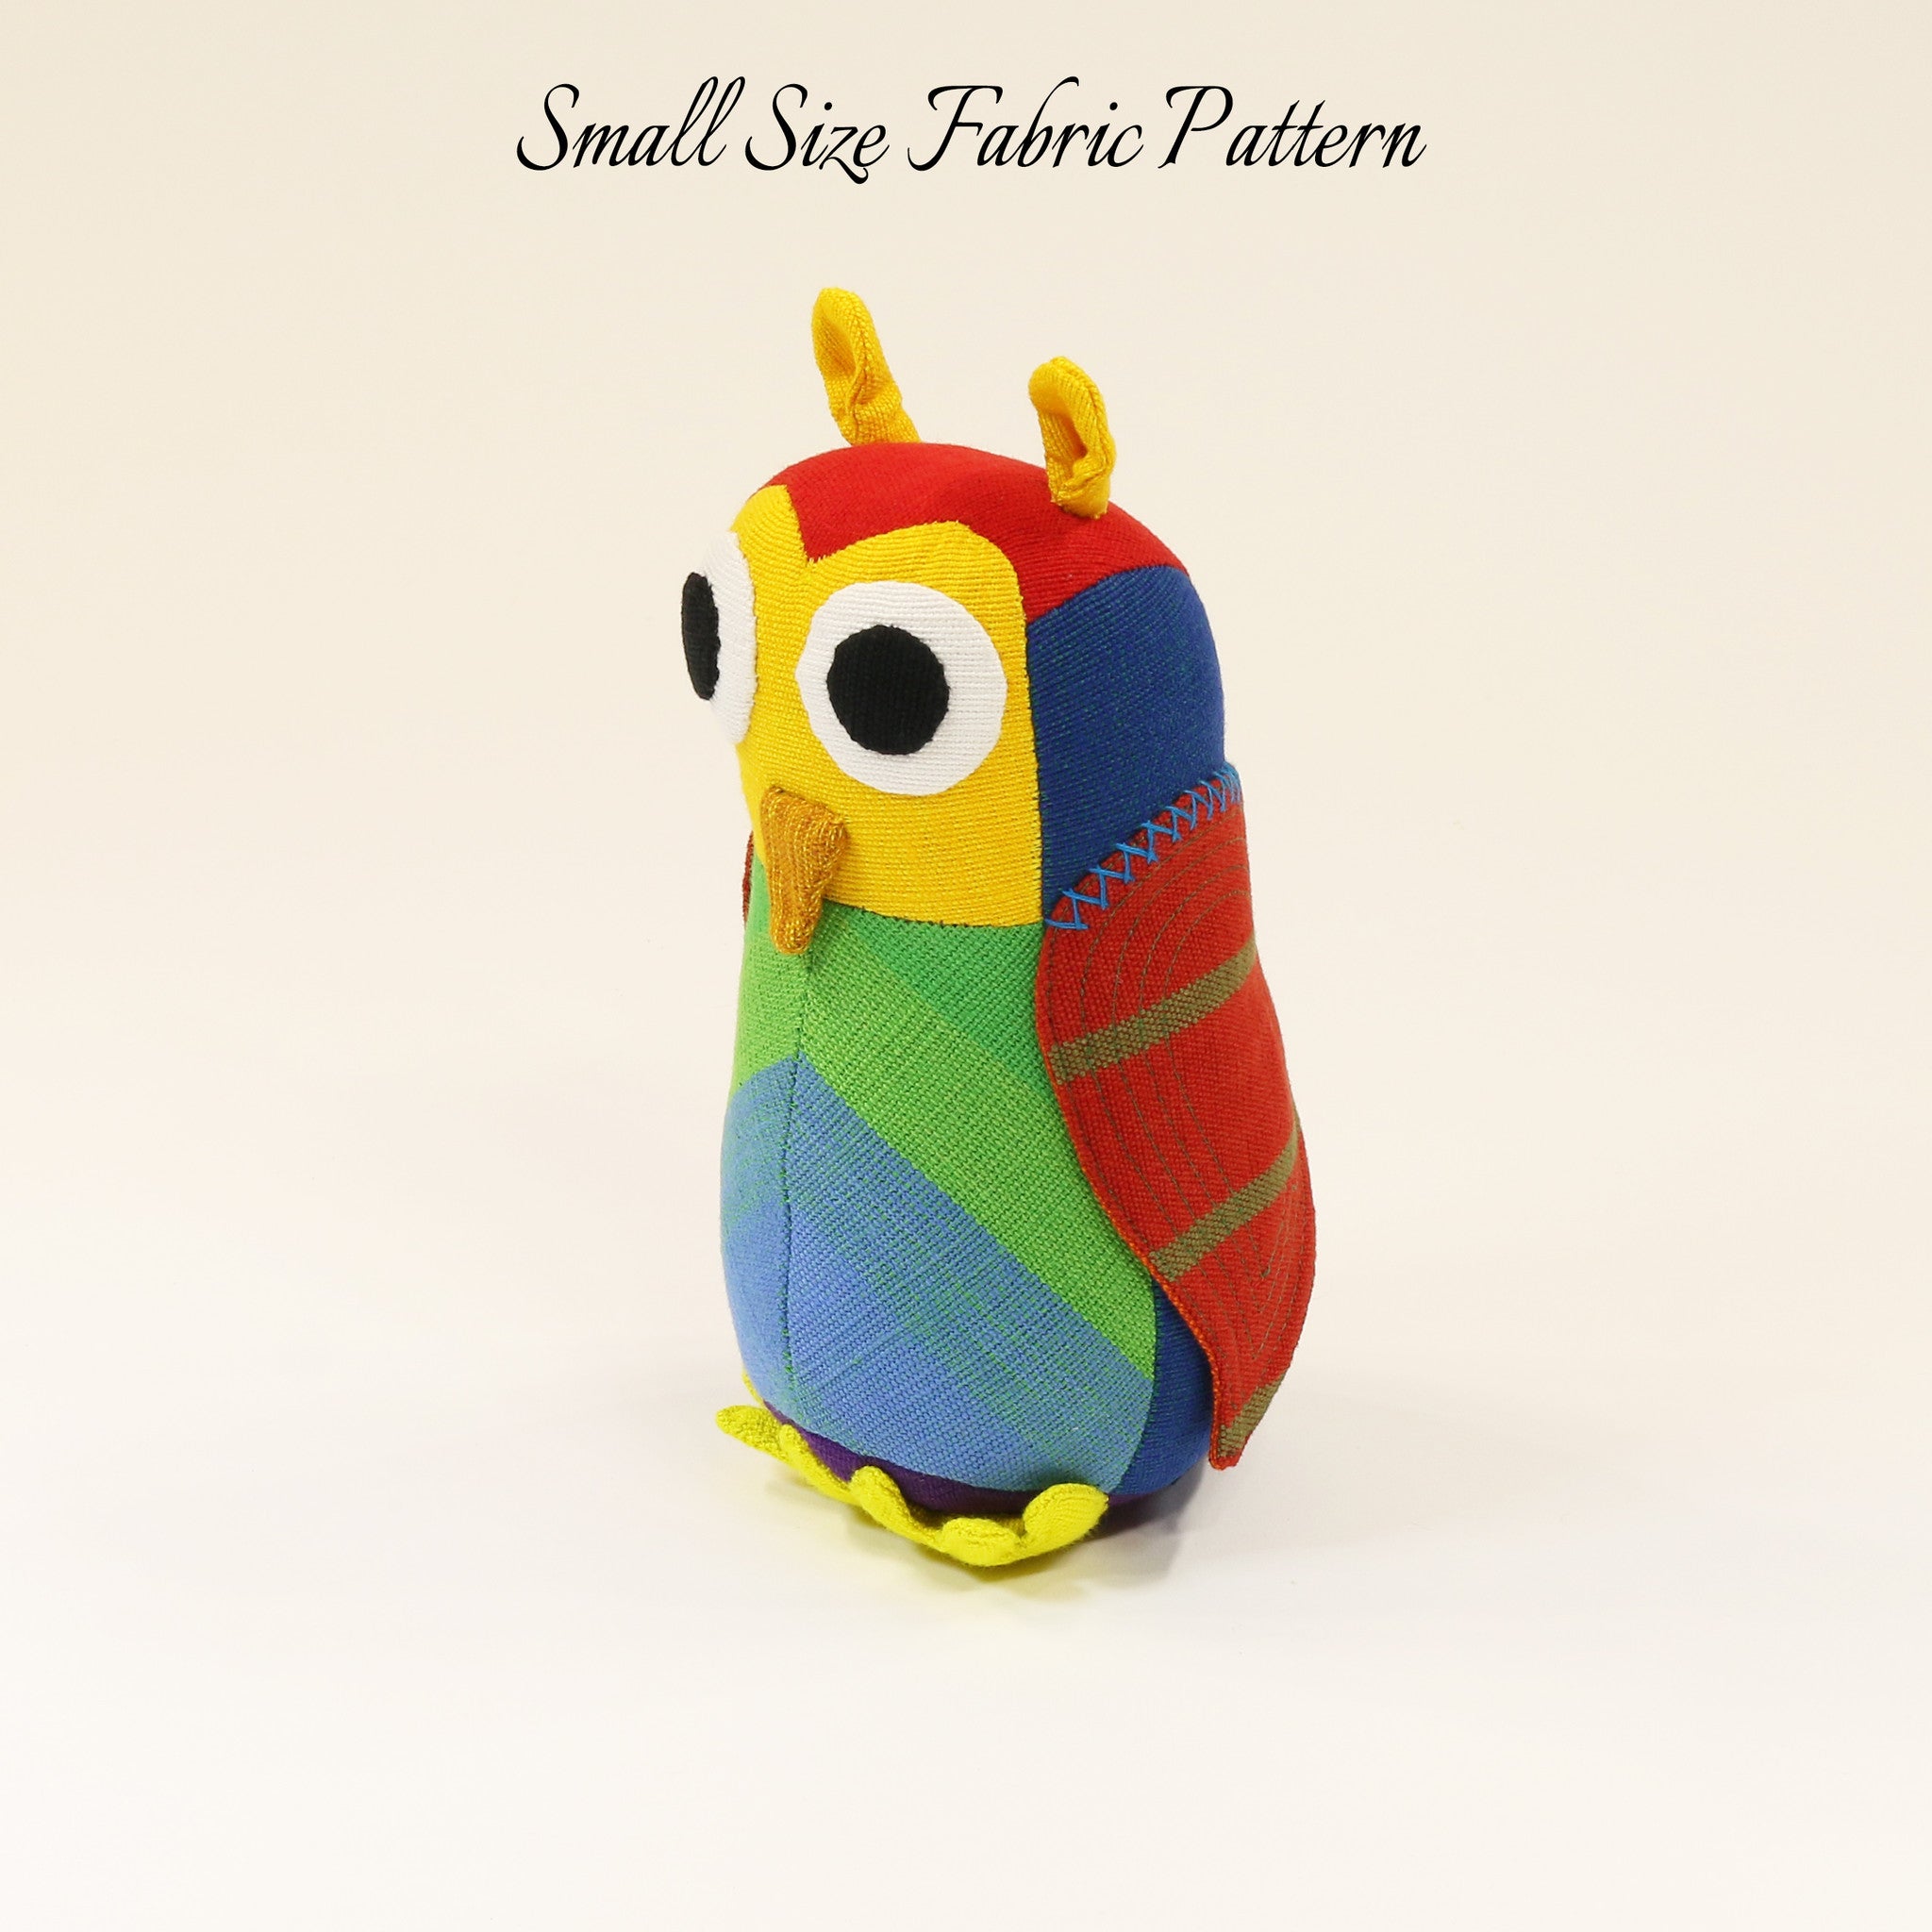 Harvey, the Owl – small size fabric pattern shown